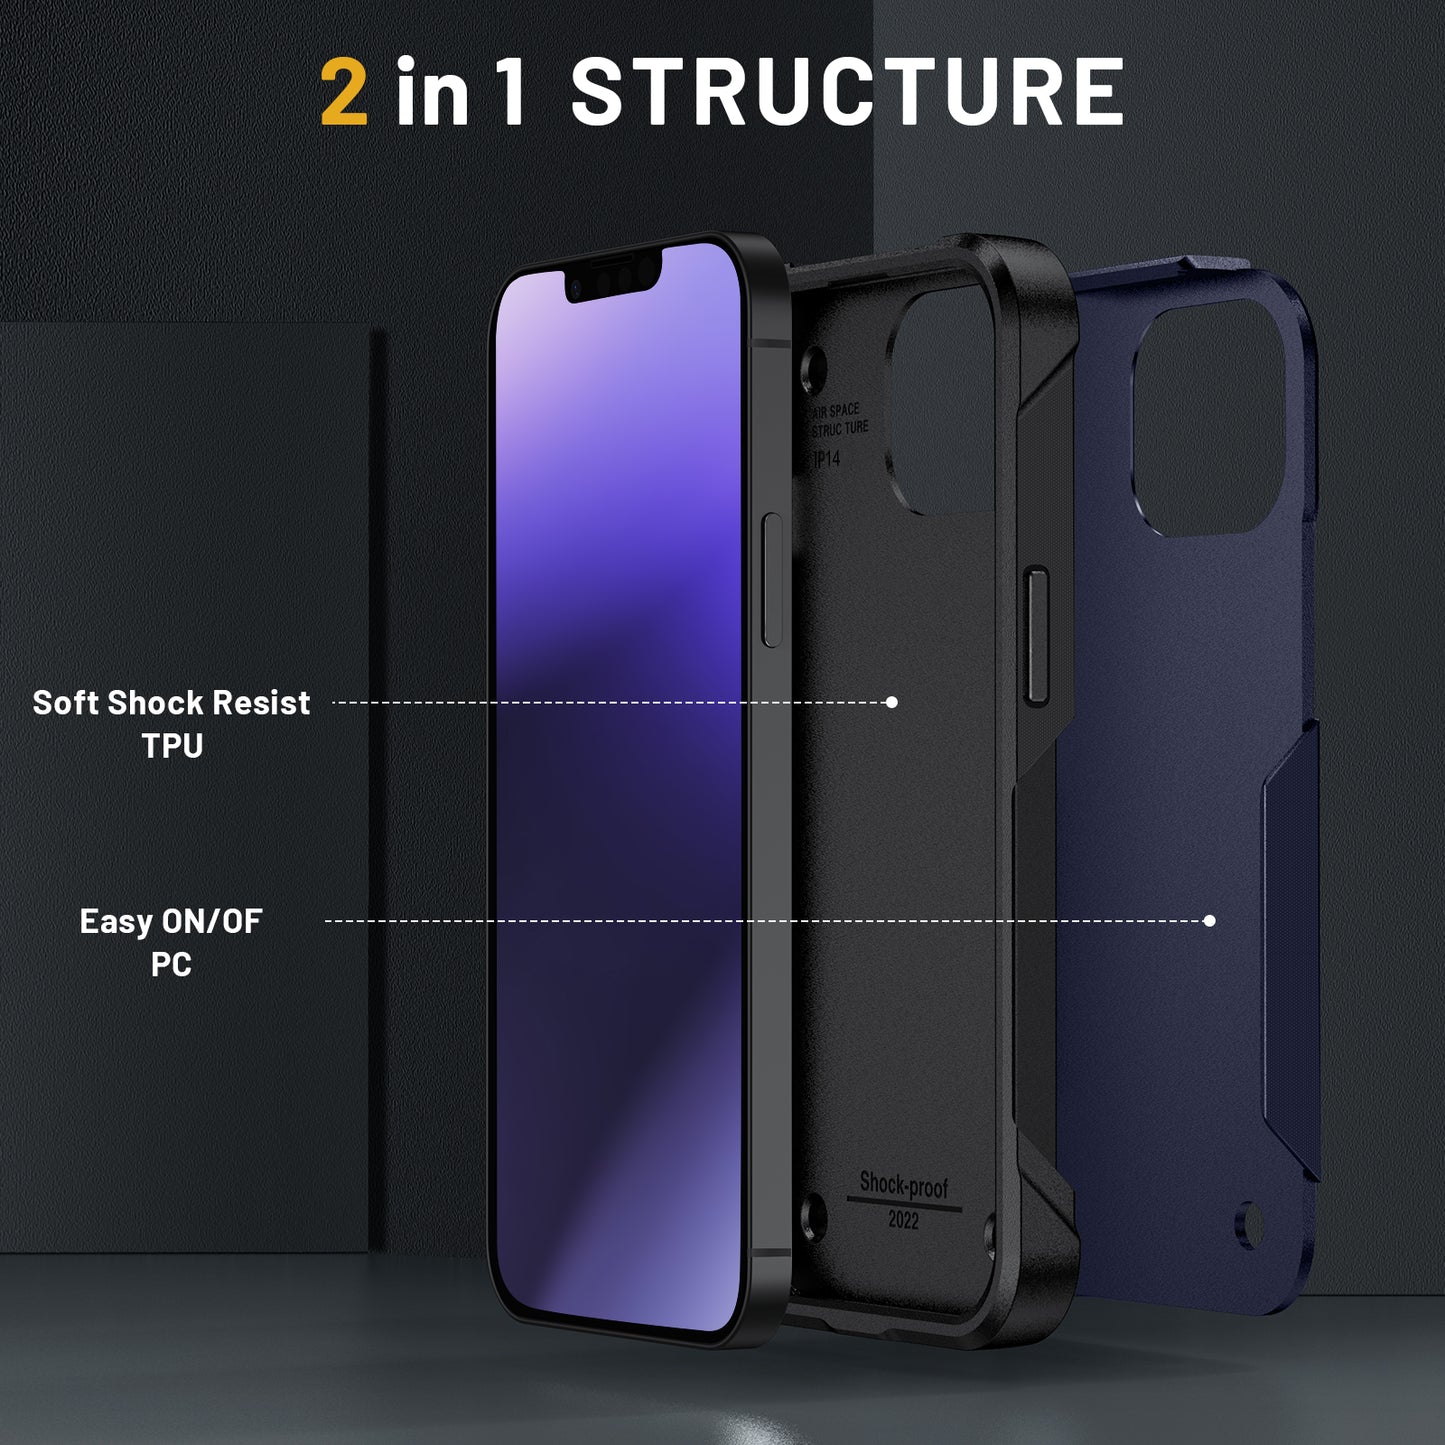 new personalized design high resilience tpu+pc material anti shock phone case for iphone 11 pro max